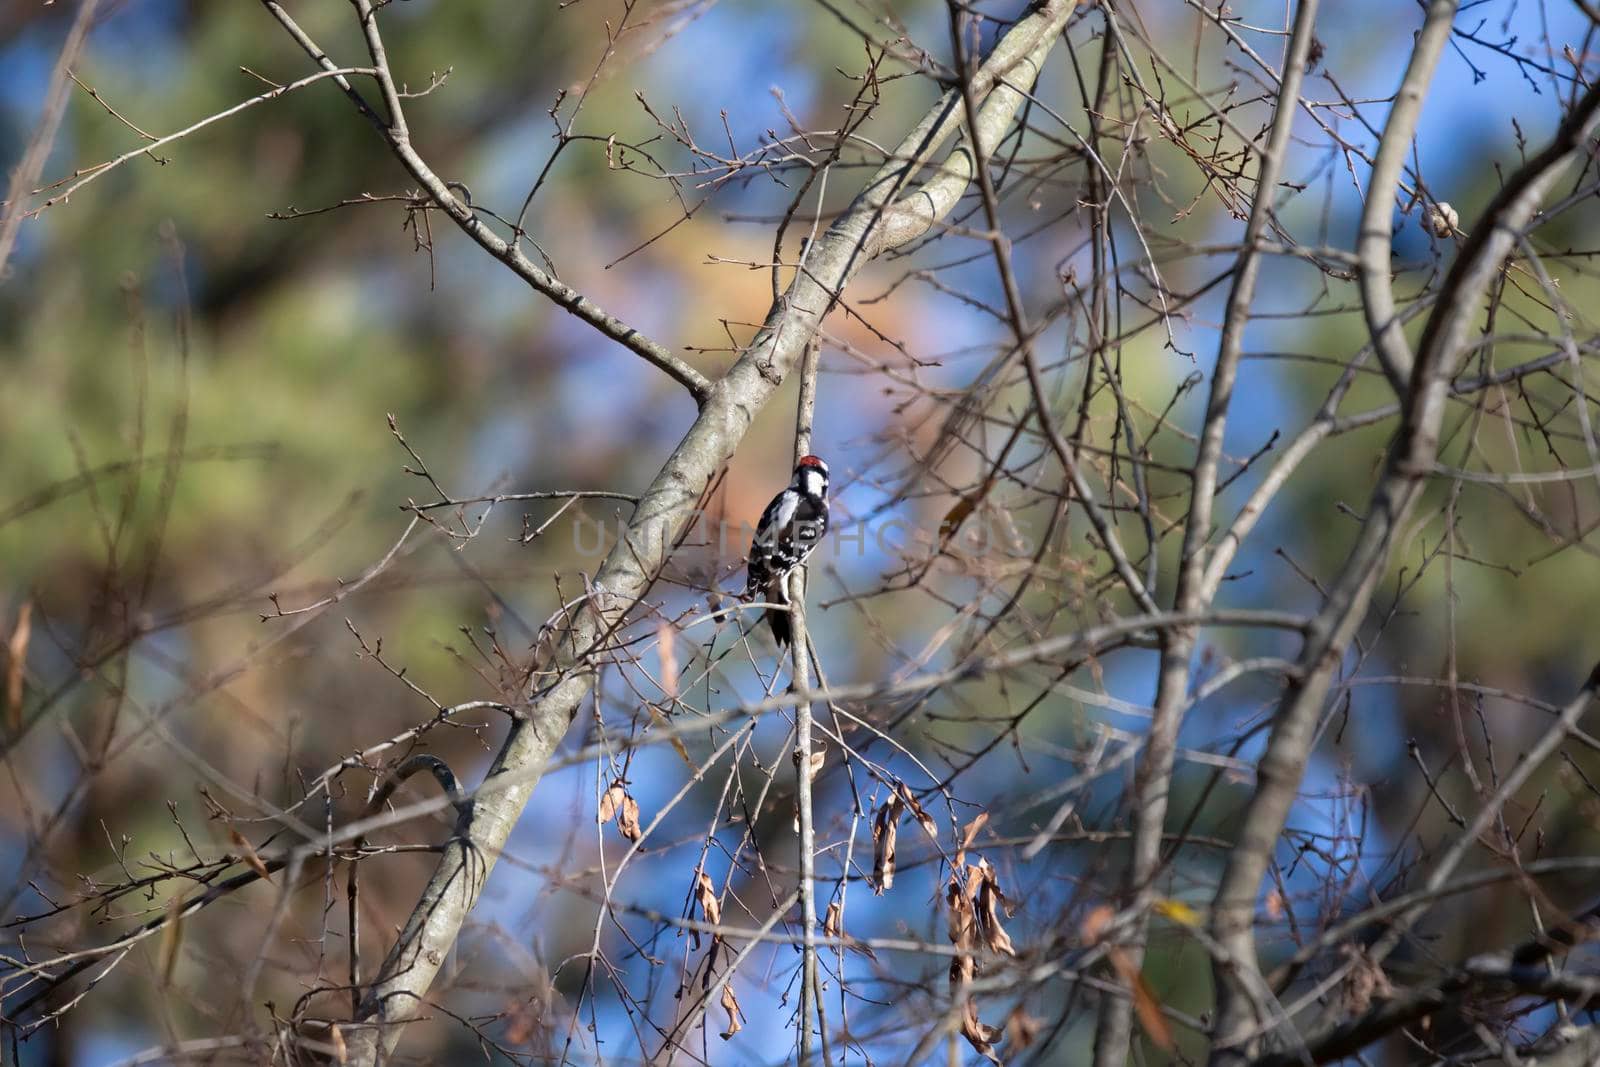 Male downy woodpecker (Picoides pubescens) foraging on a tree limb